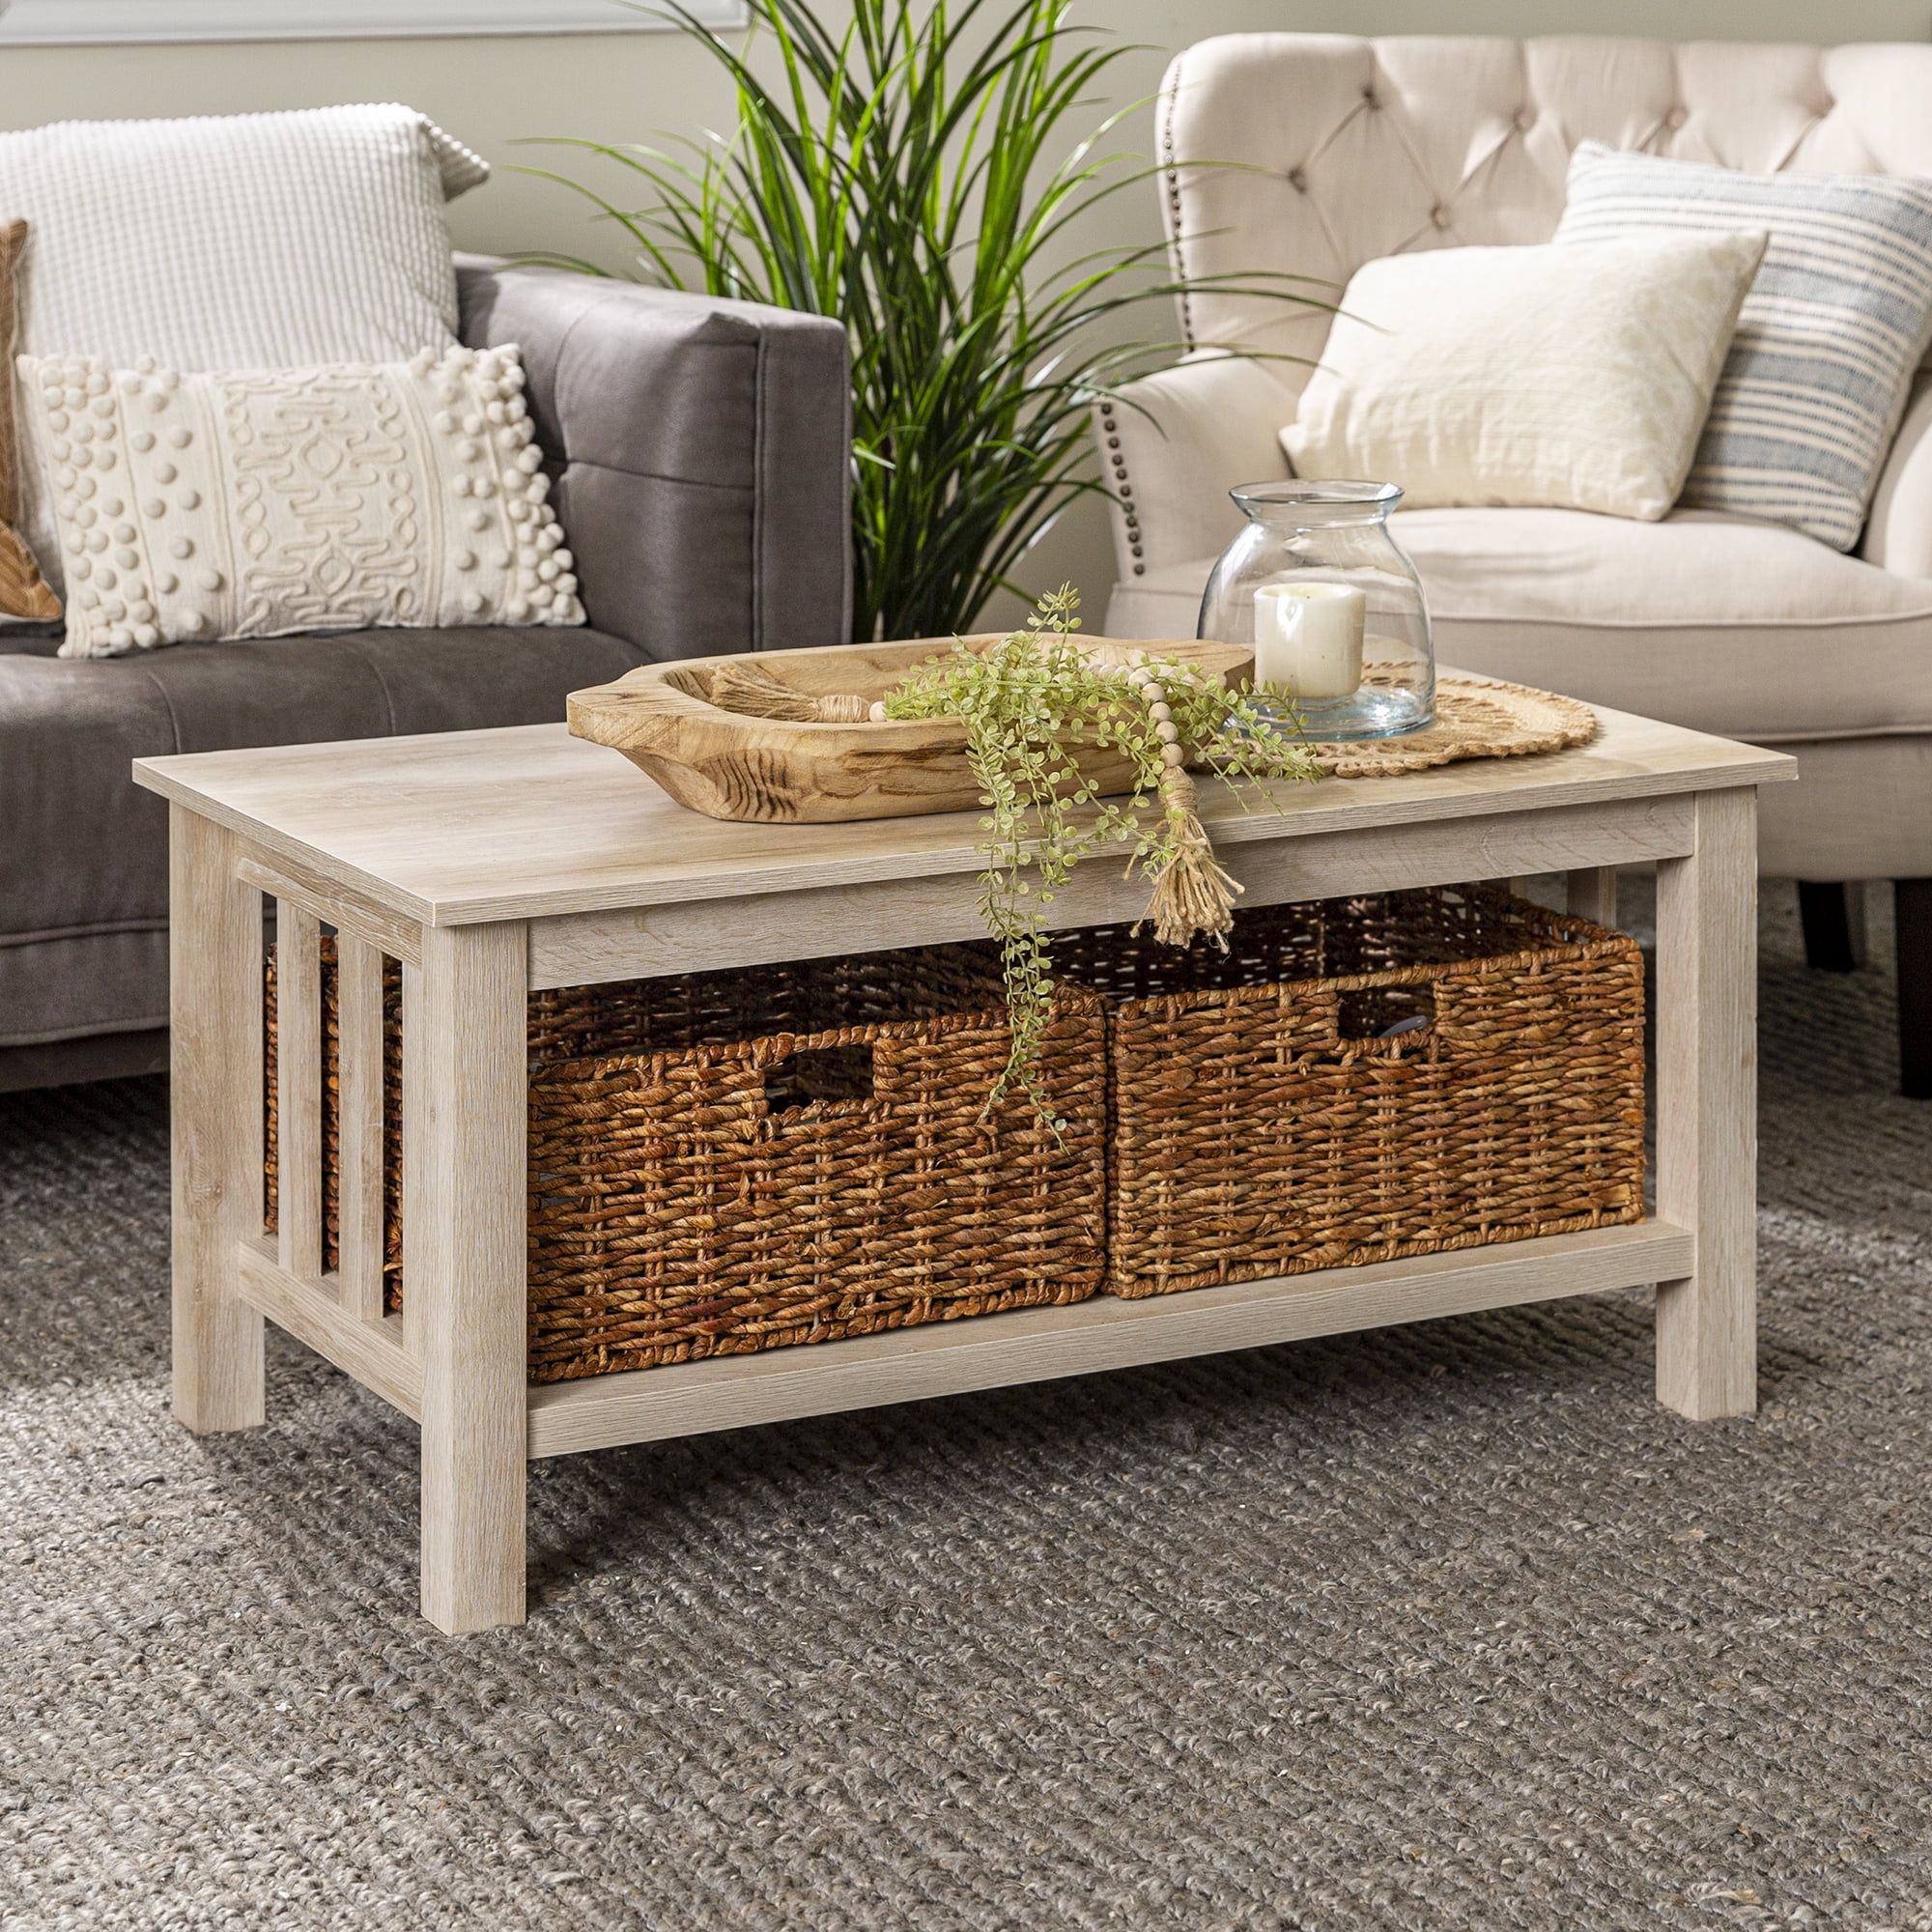 Woven Paths Traditional Storage Coffee Table With Bins, White Oak –  Walmart In Woven Paths Coffee Tables (Photo 2 of 15)